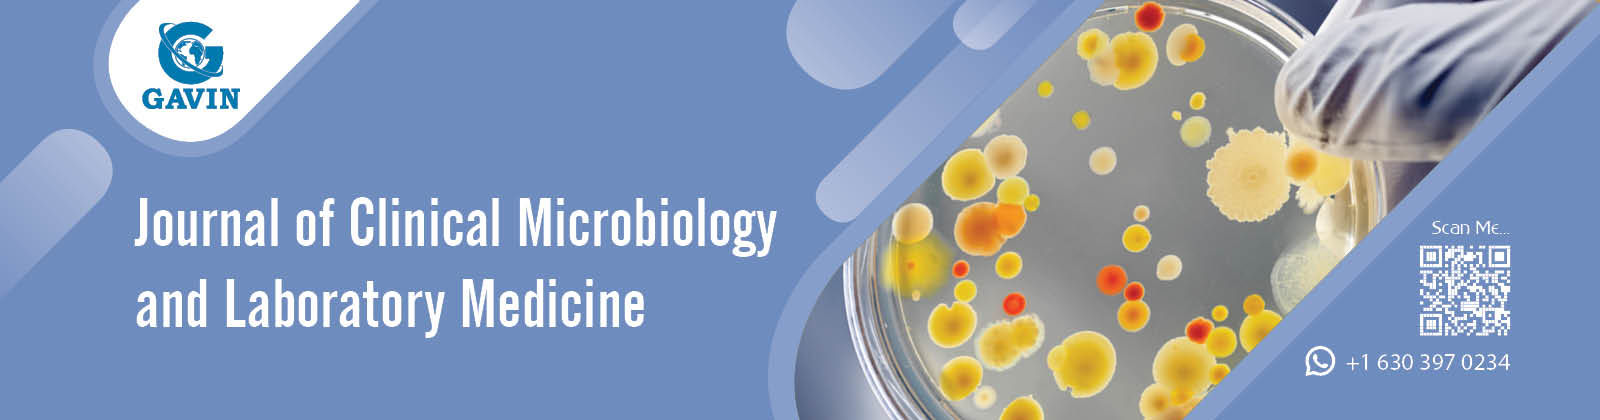 Journal of Clinical Microbiology and Laboratory Medicine